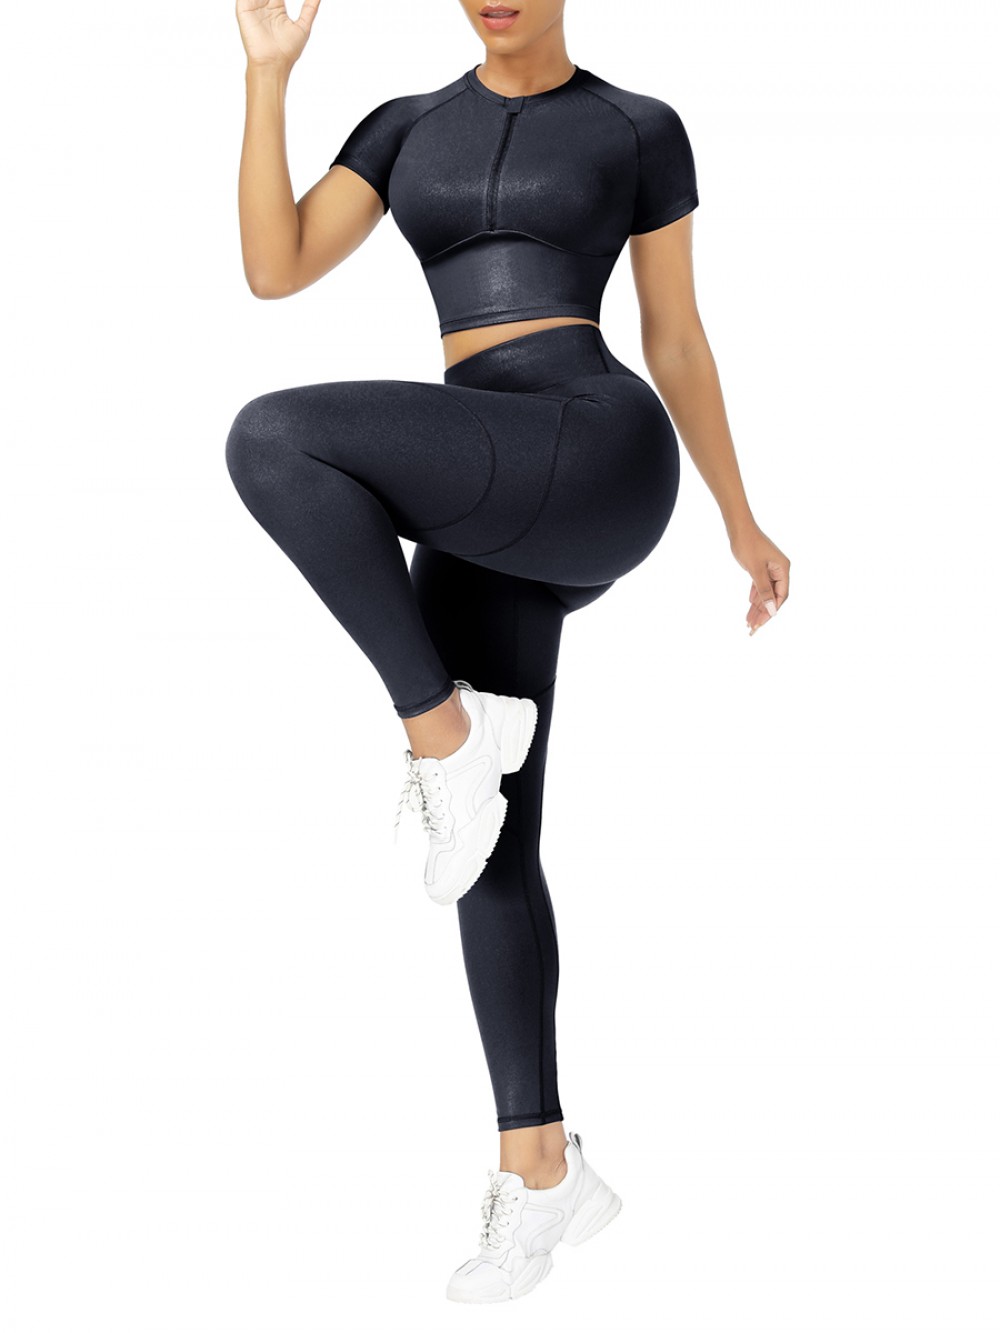 Black Short Sleeves High Waist Yoga Suits For Fitness